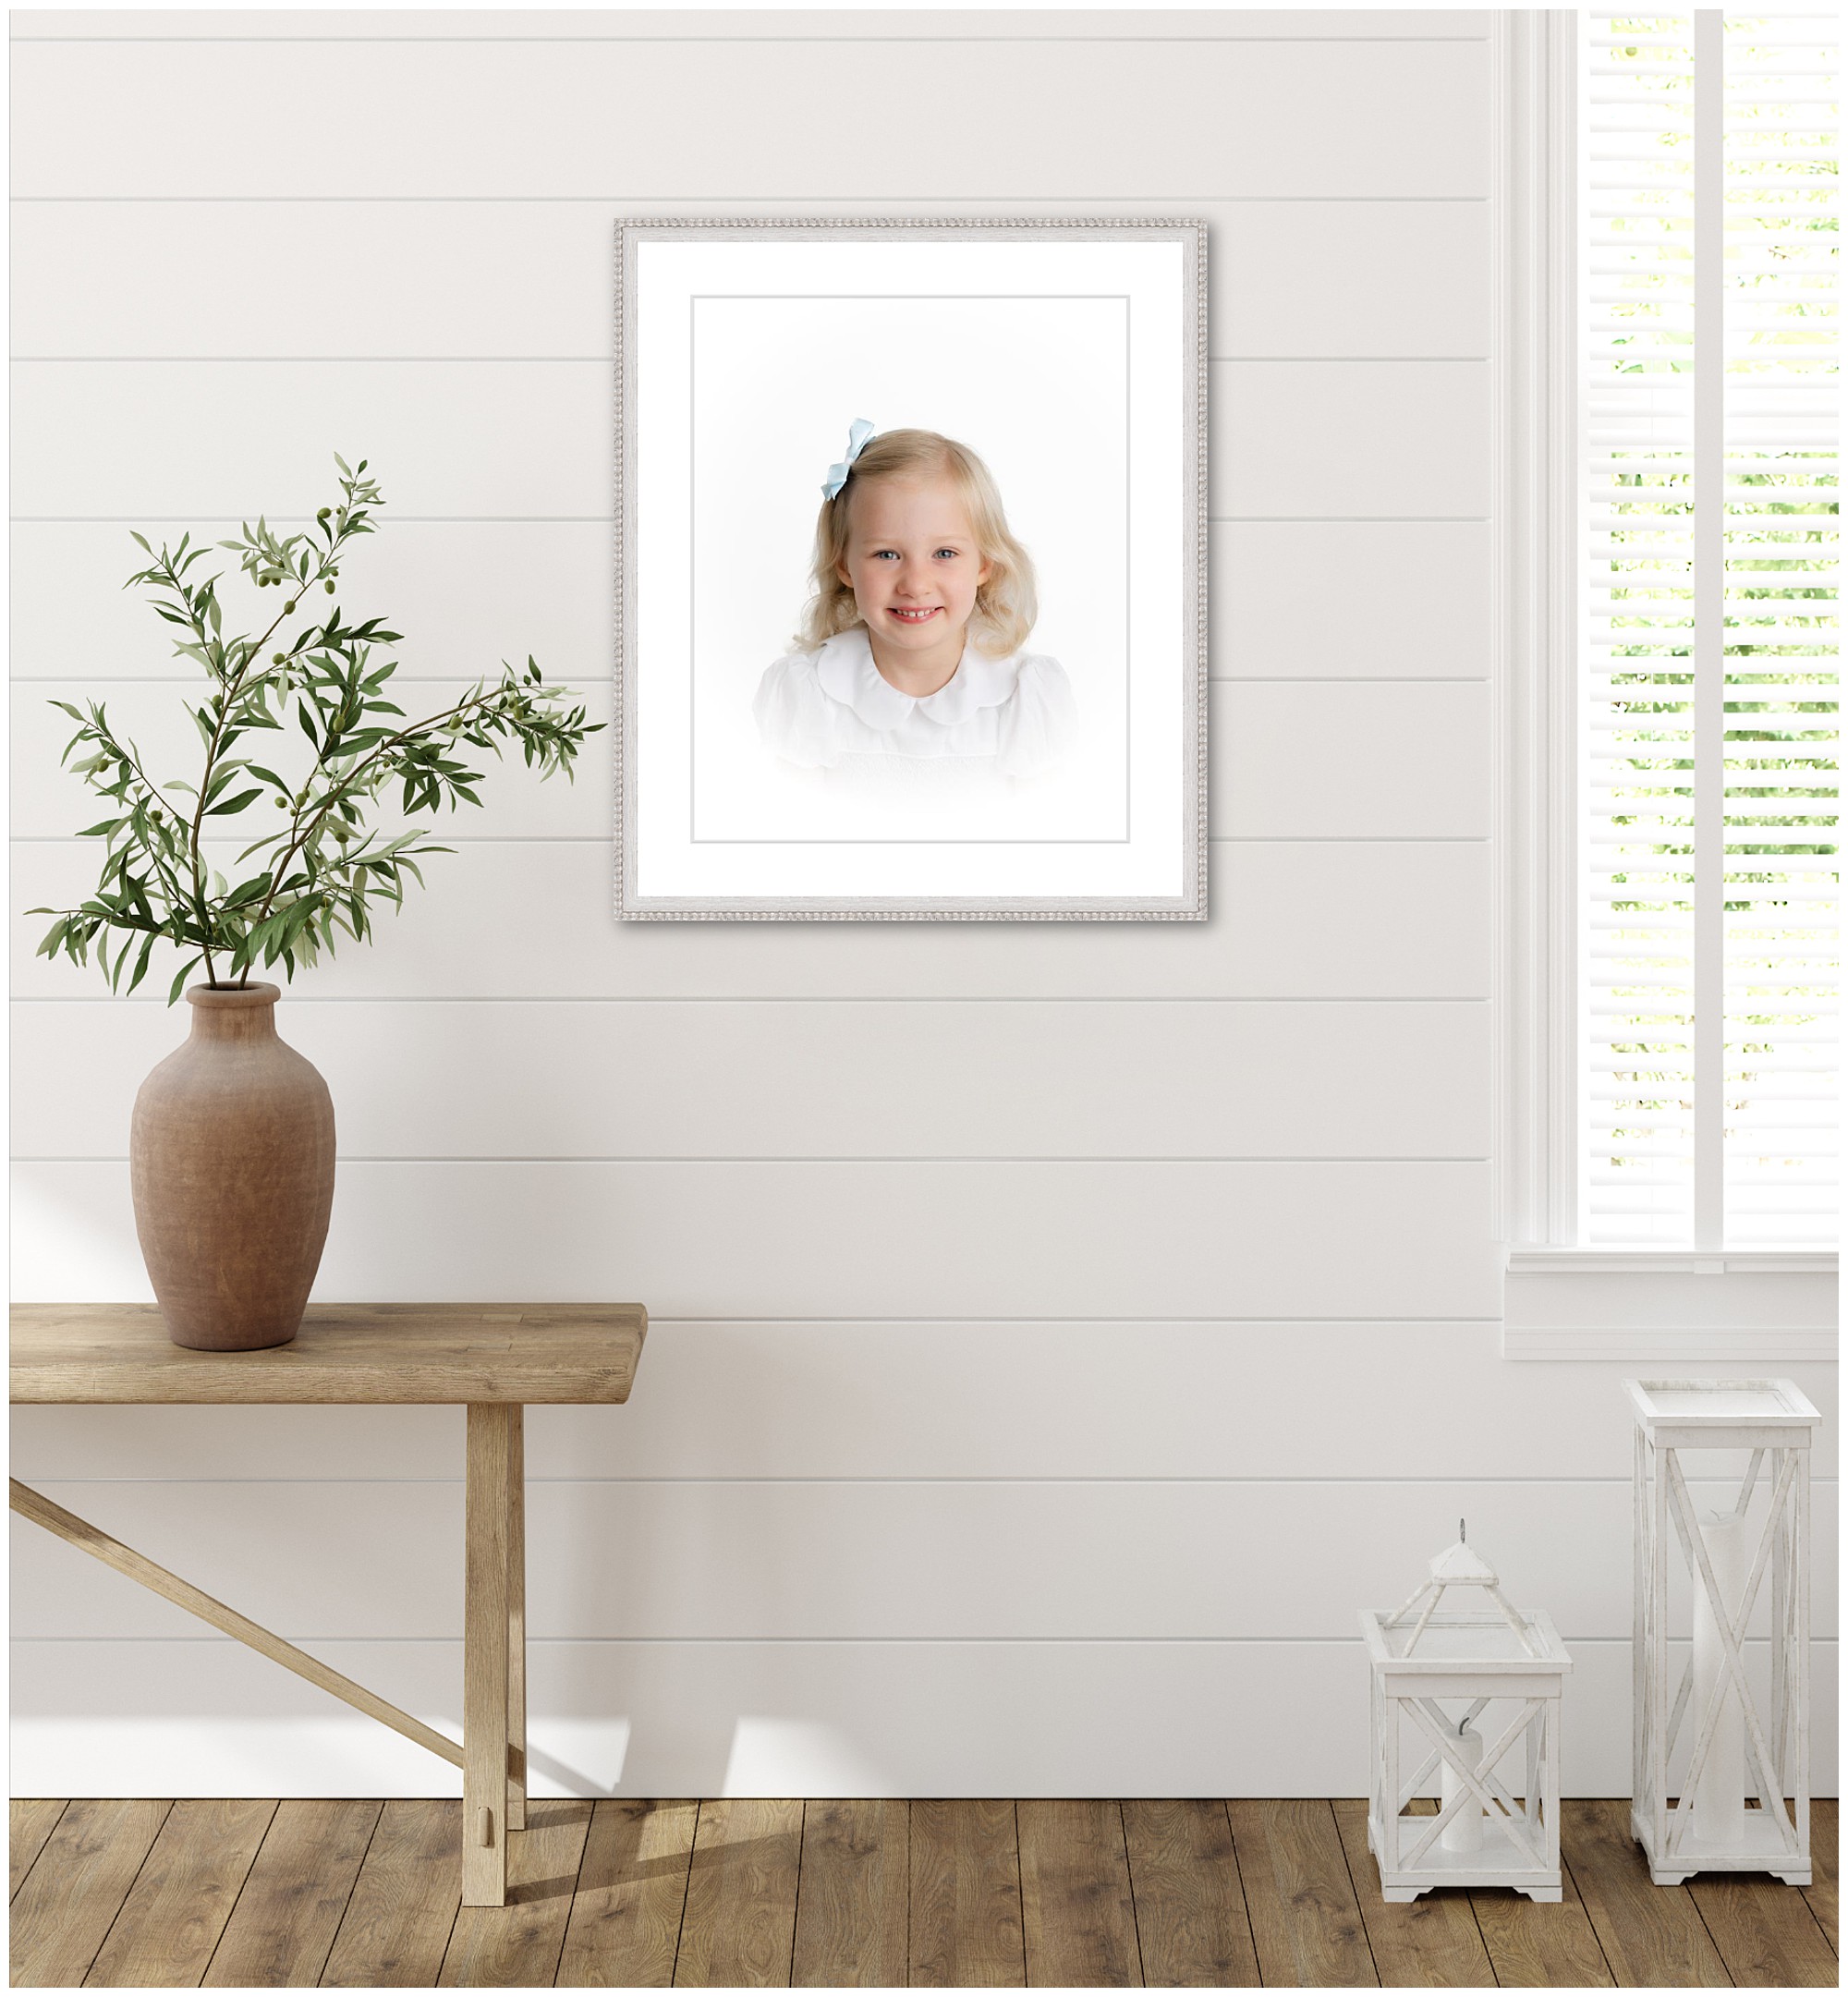 Image of a framed heirloom portrait of young girl from her Marietta heirloom photography session.